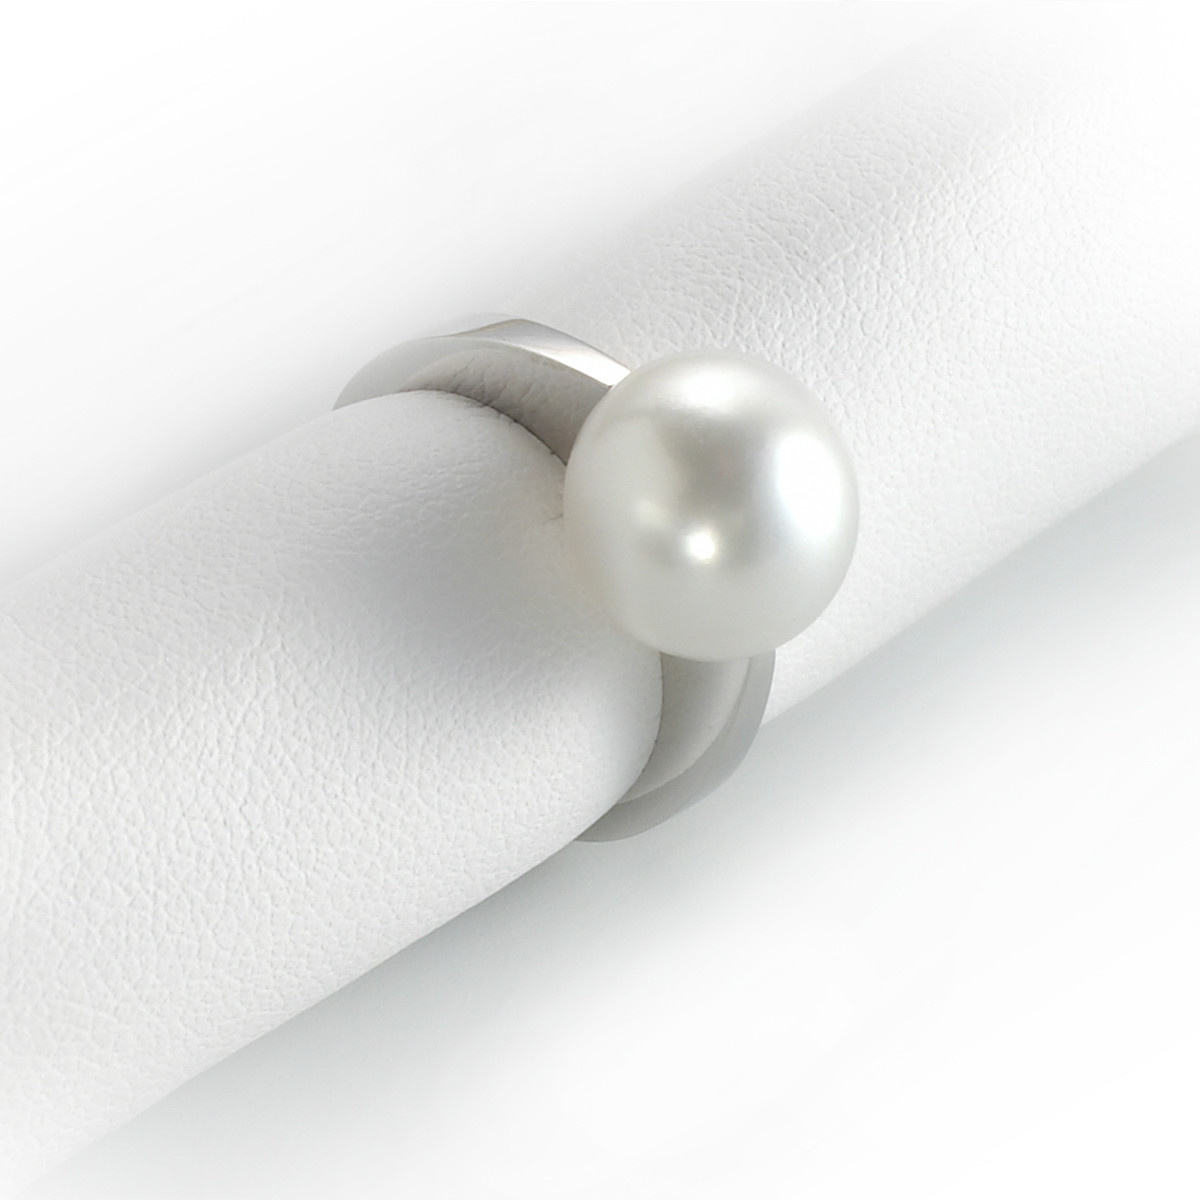 GOLD RING WITH AUSTRALIAN PEARL 11 MM